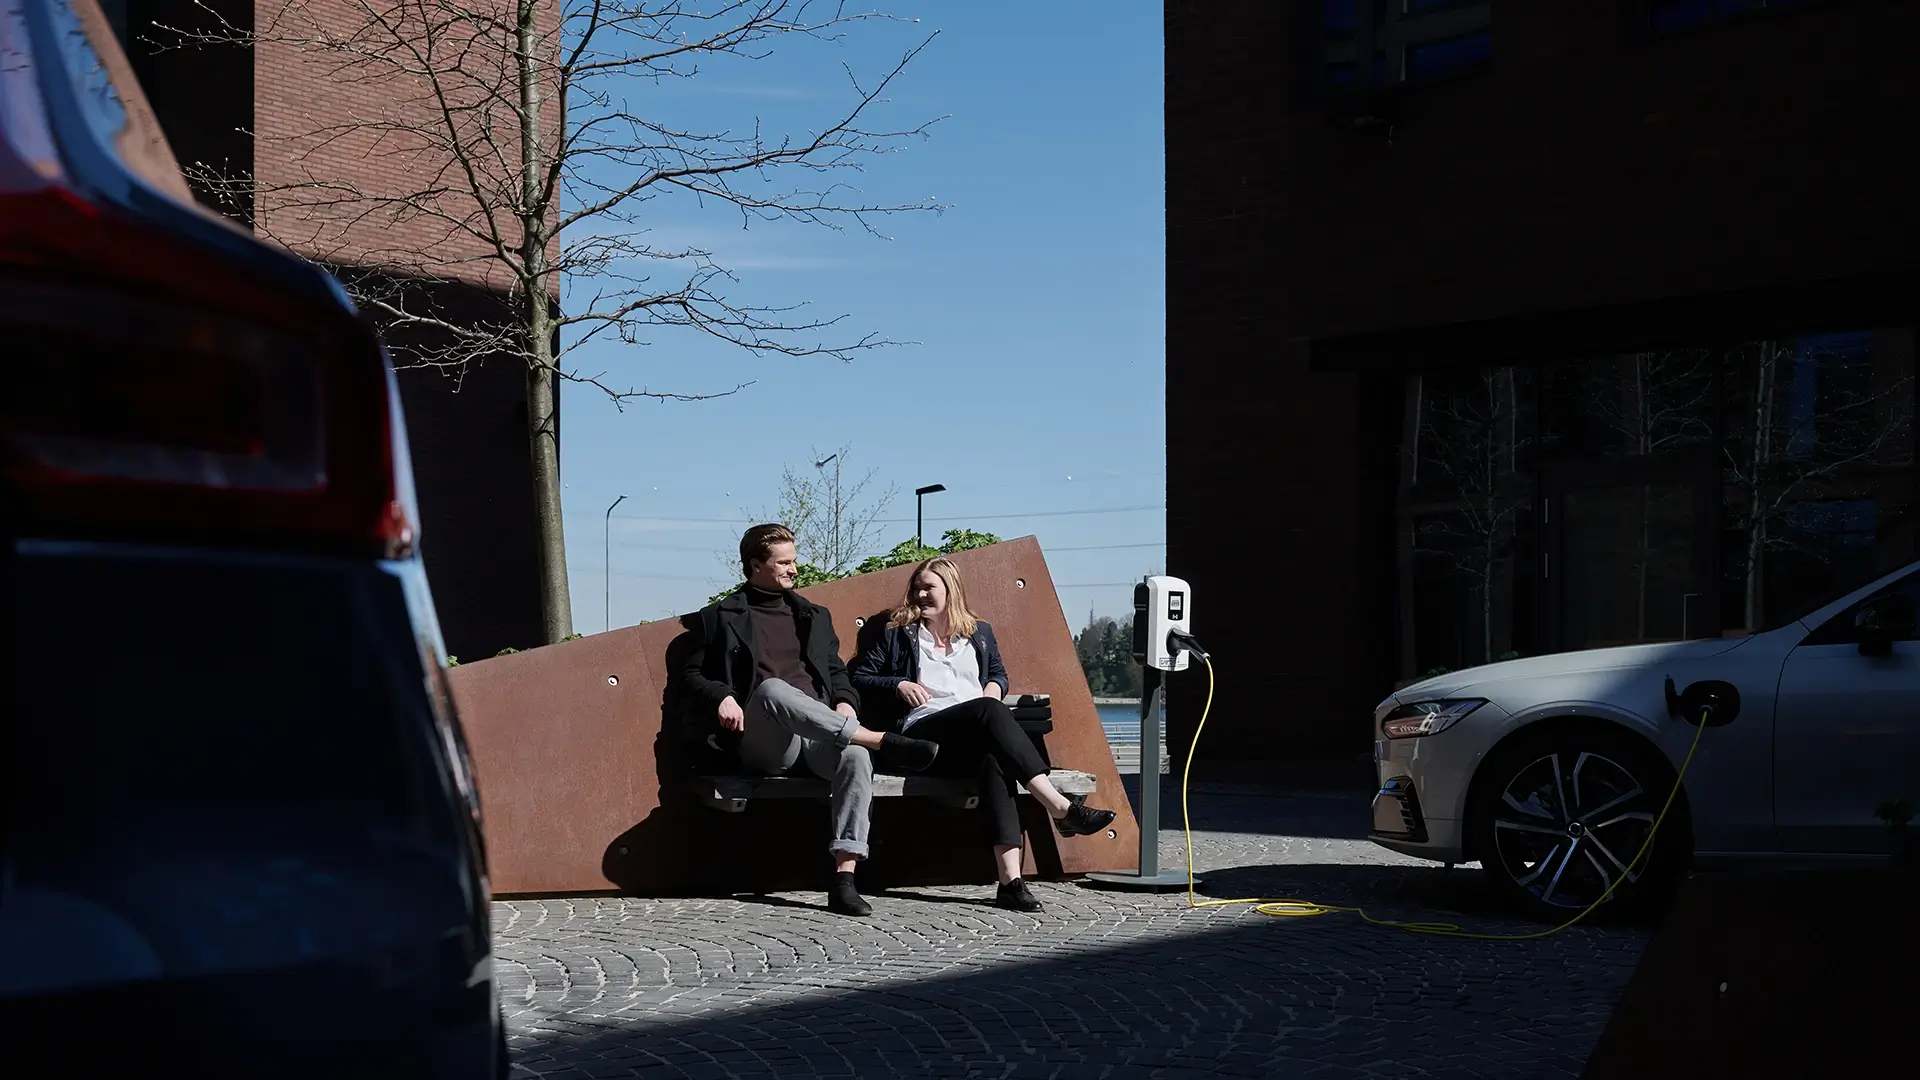 Couple enjoying coffee while electric vehicle charges urban setting